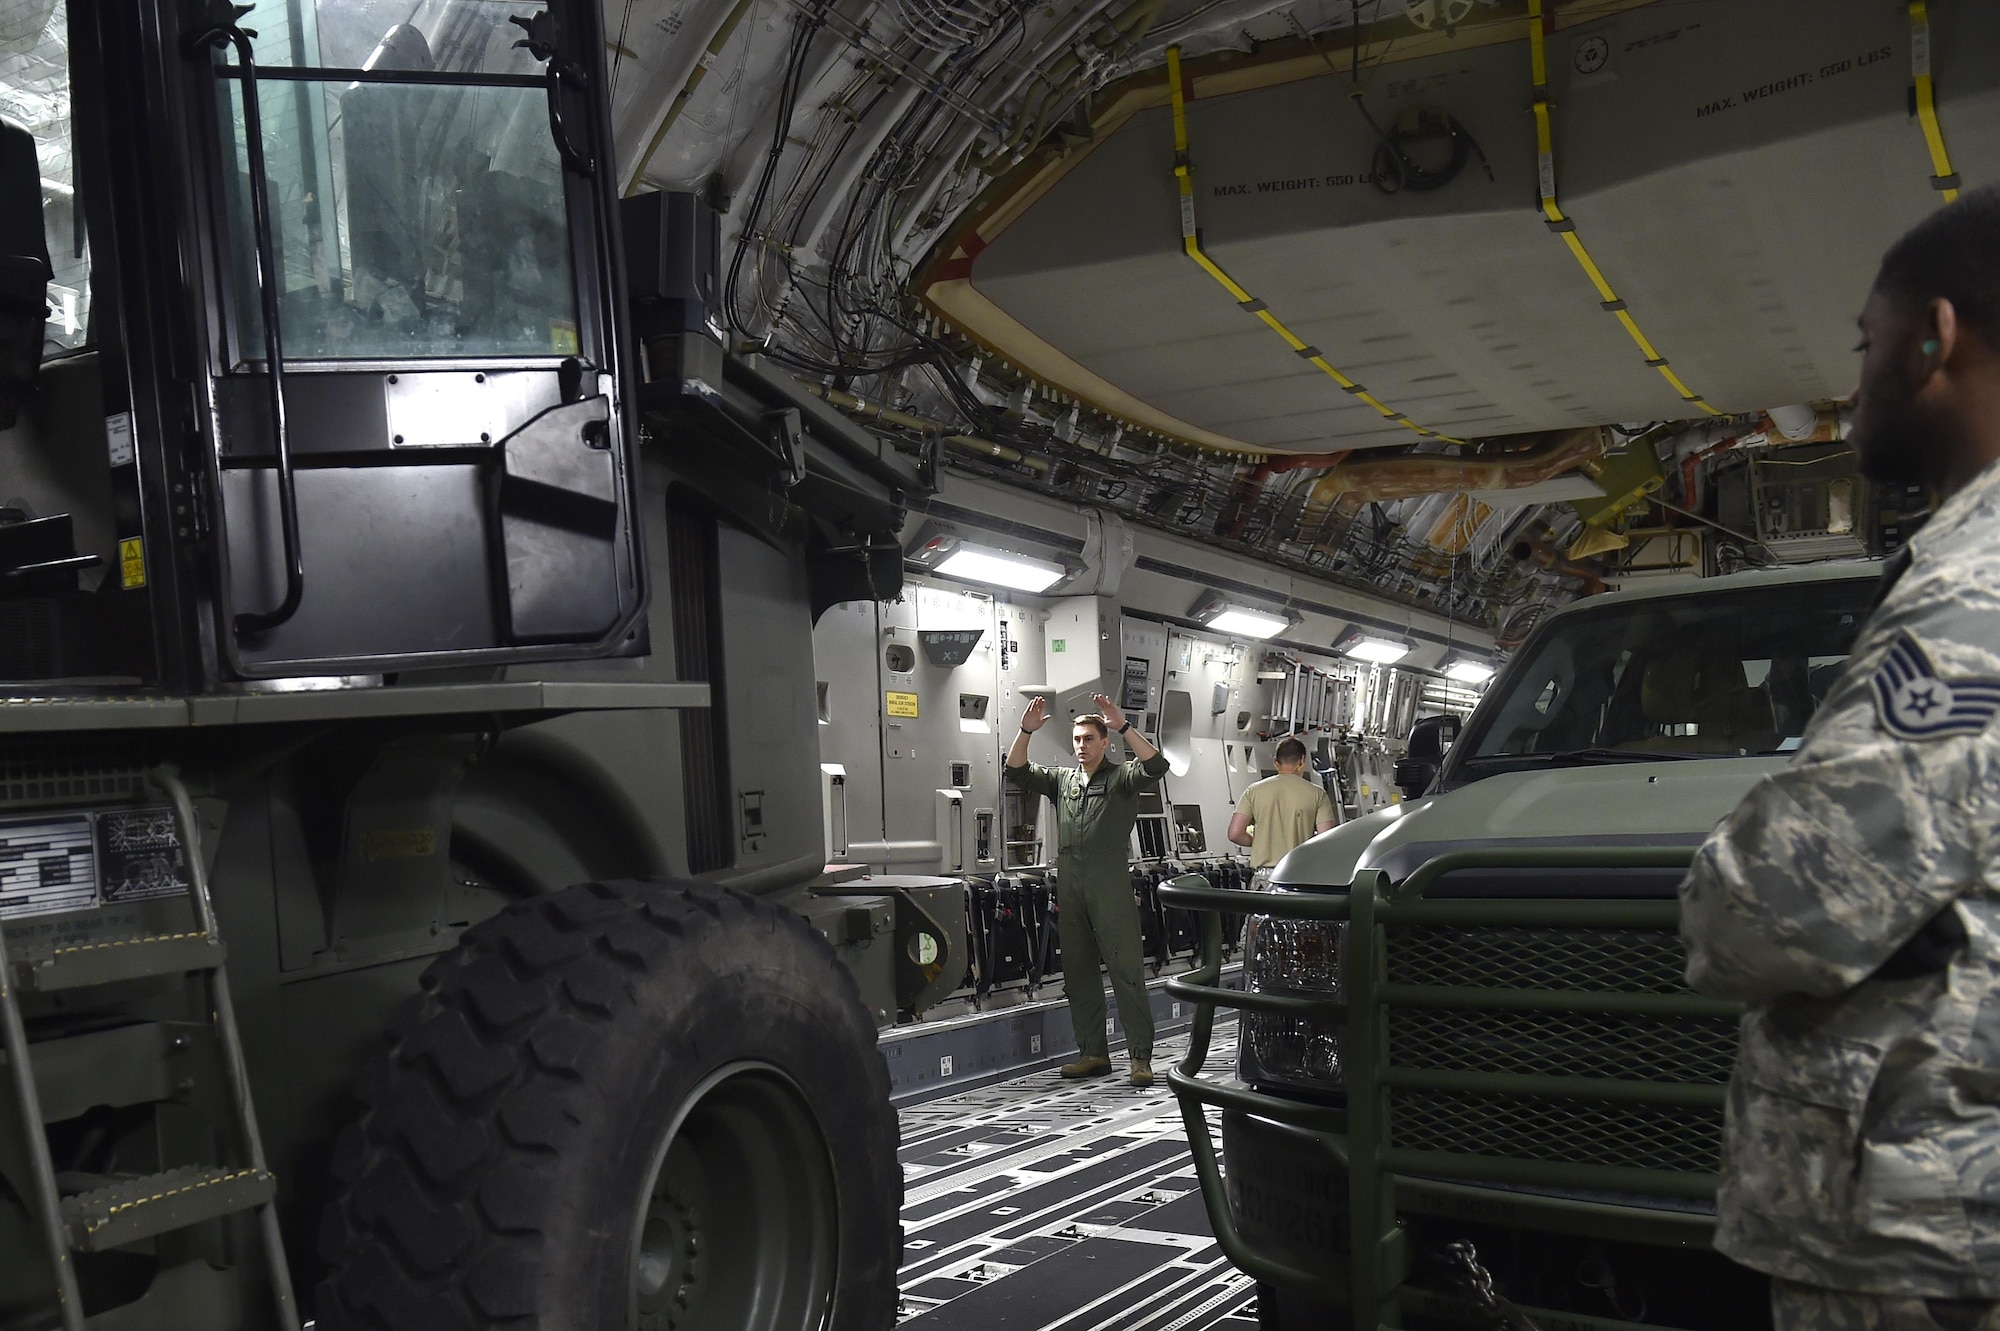 Staff Sgt. Dungan Farver, 16th Airlift Squadron loadmaster, signals a 10K All Terrain forklift onto a C-17 Globemaster III aircraft, Sep. 13, 2017, at Scott Air Force Base, Ill.   A 17-member contingency response team from the 821st Contingency Response Group from Travis Air Force Base, Calif., deployed to Homestead Air Reserve Base, Fla., to augment the 439th Airlift Wing airfield capabilities in support of Hurricane Irma relief efforts.  (U.S. Air Force photo by Tech. Sgt. Liliana Moreno/Released)